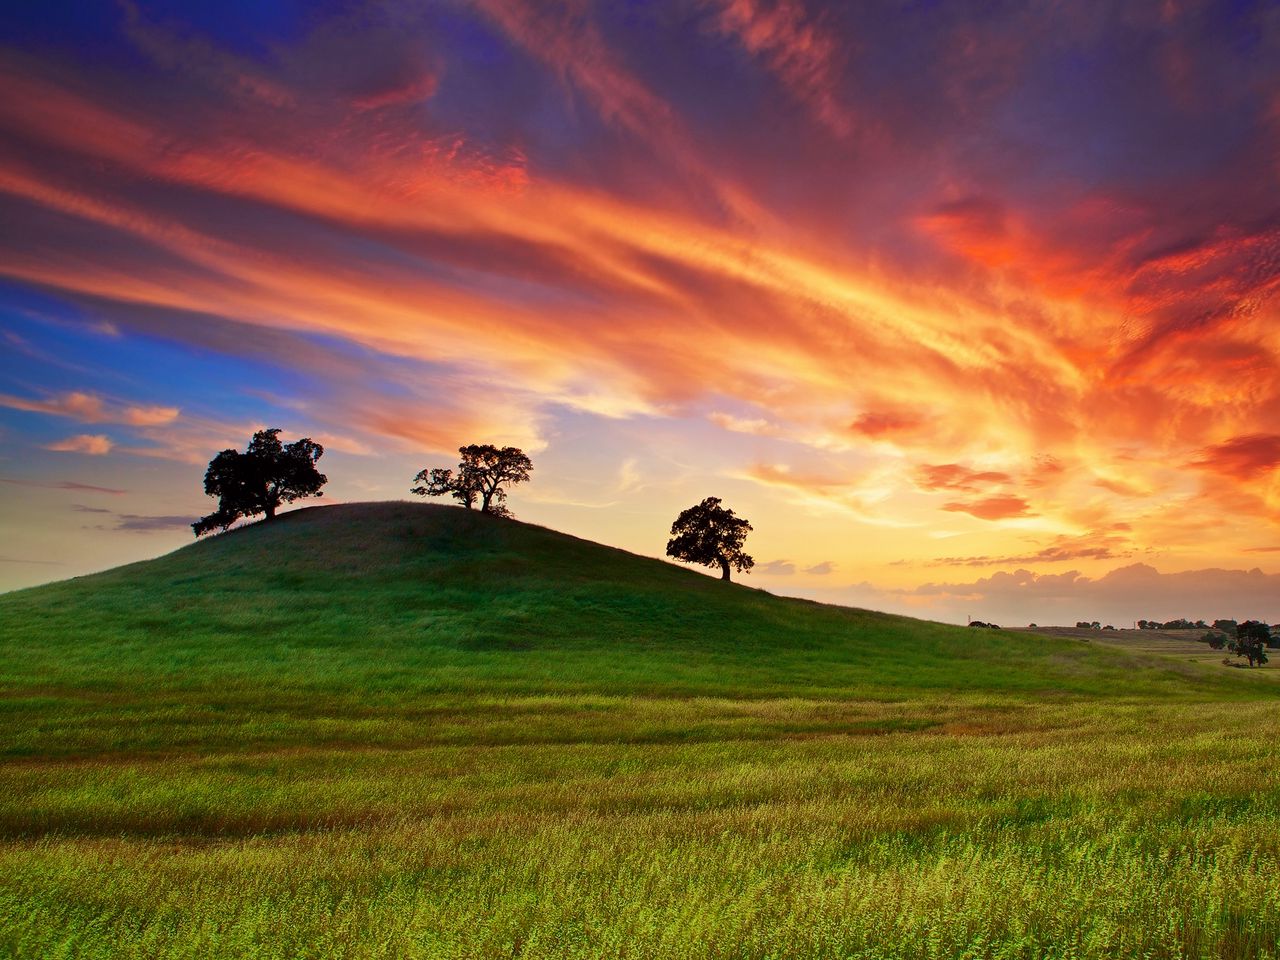 Download wallpaper 1280x960 usa, california, sunset, spring, may, sky, clouds, field, grass, trees standard 4:3 HD background